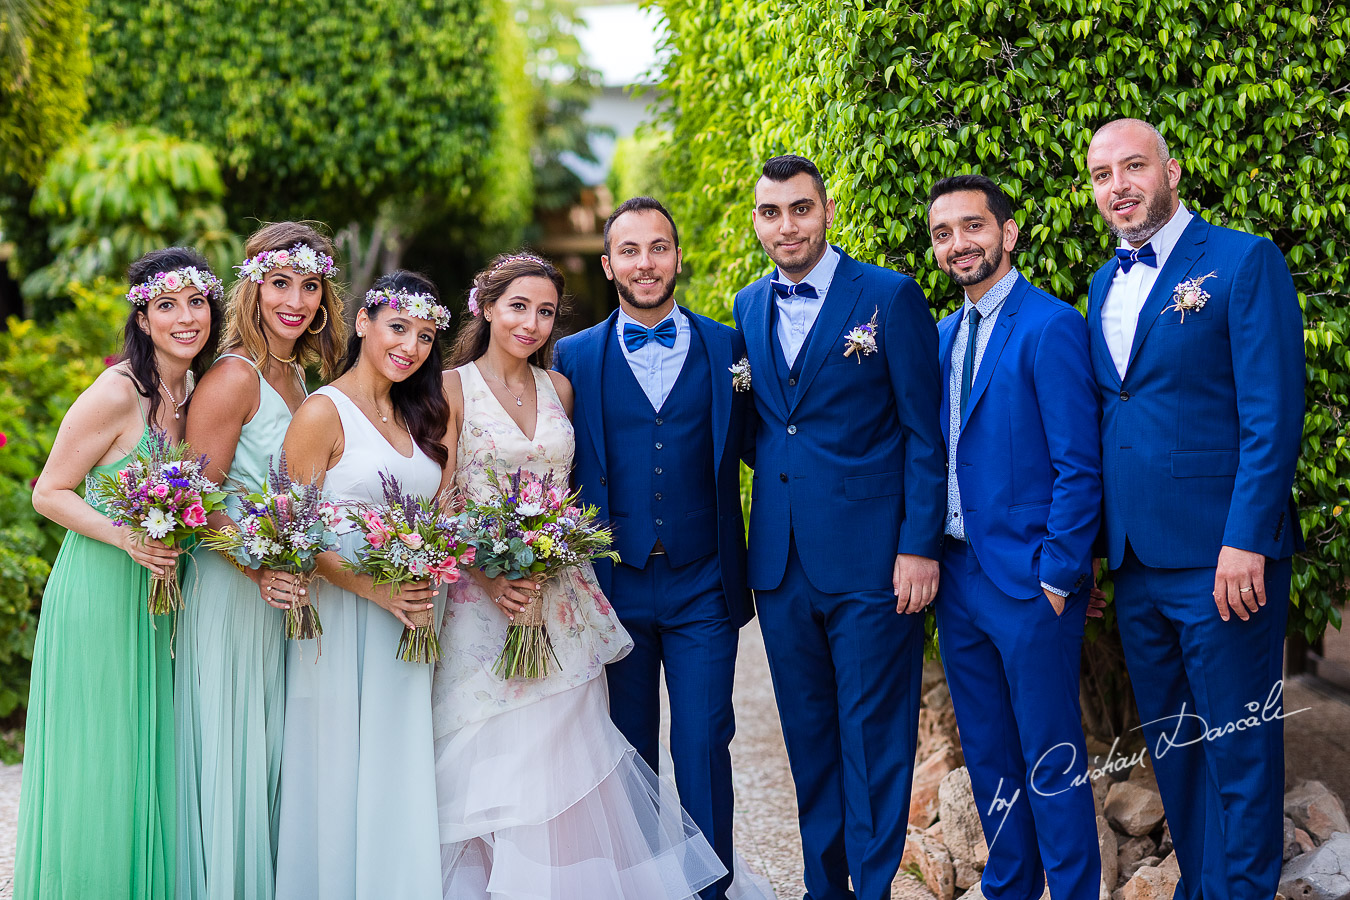 Portrait with the bride and groom and their bridesmaids and groomsmen photographed as part of an Exclusive Wedding photography at Grand Resort Limassol, captured by Cyprus Wedding Photographer Cristian Dascalu.